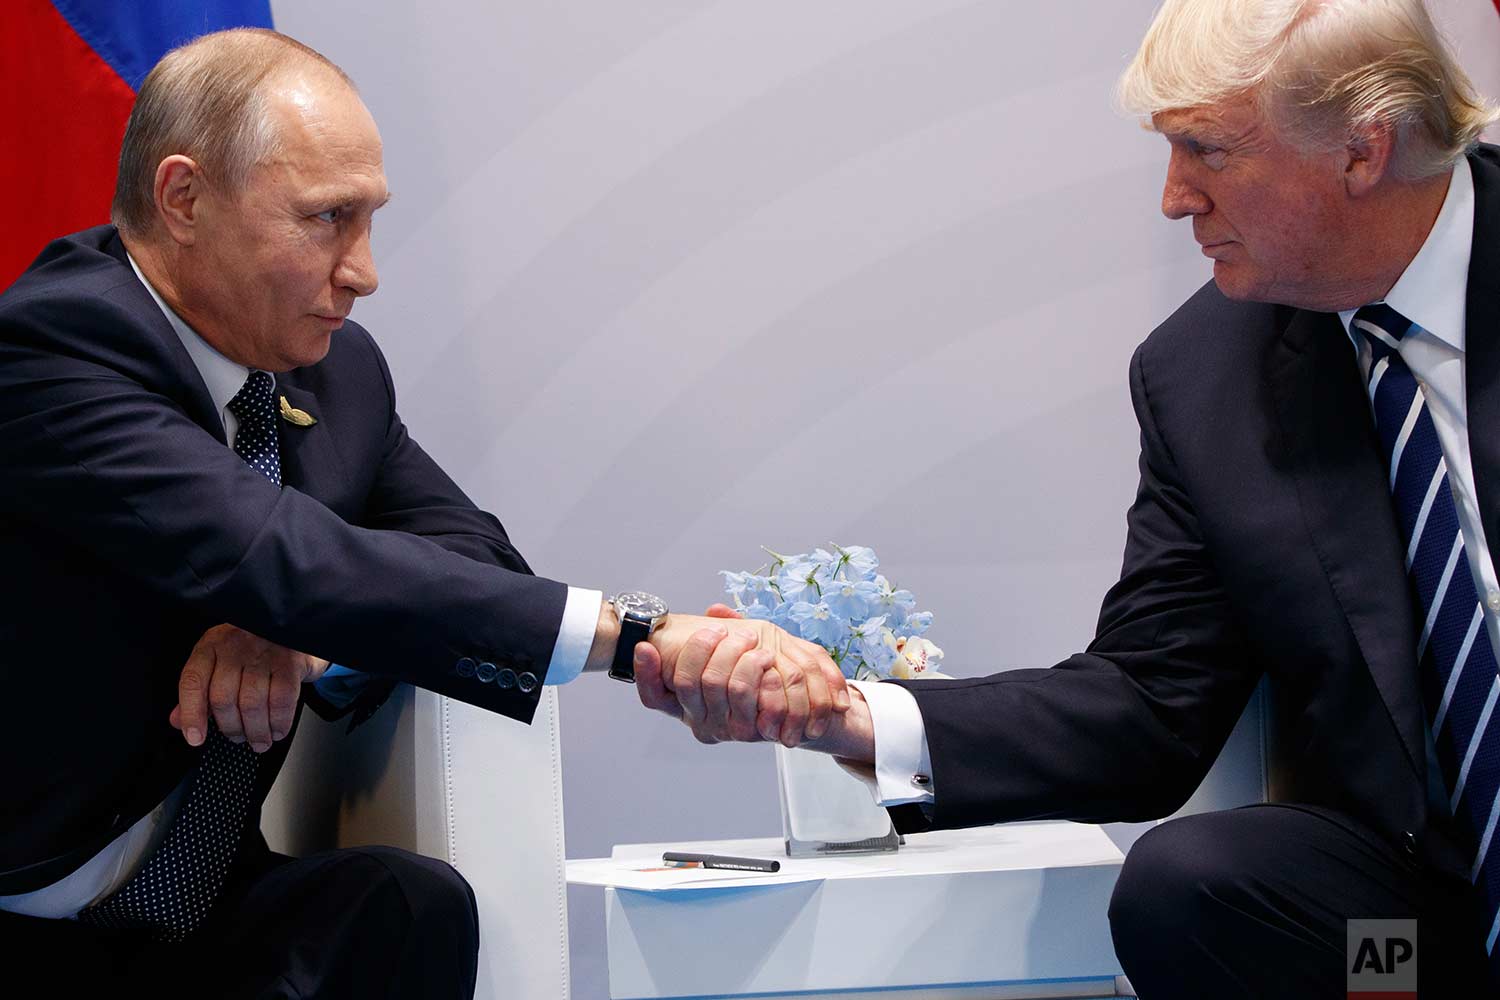  In this Friday, July 7, 2017 photo, President Donald Trump shakes hands with Russian President Vladimir Putin at the G20 Summit in Hamburg. (AP Photo/Evan Vucci) 